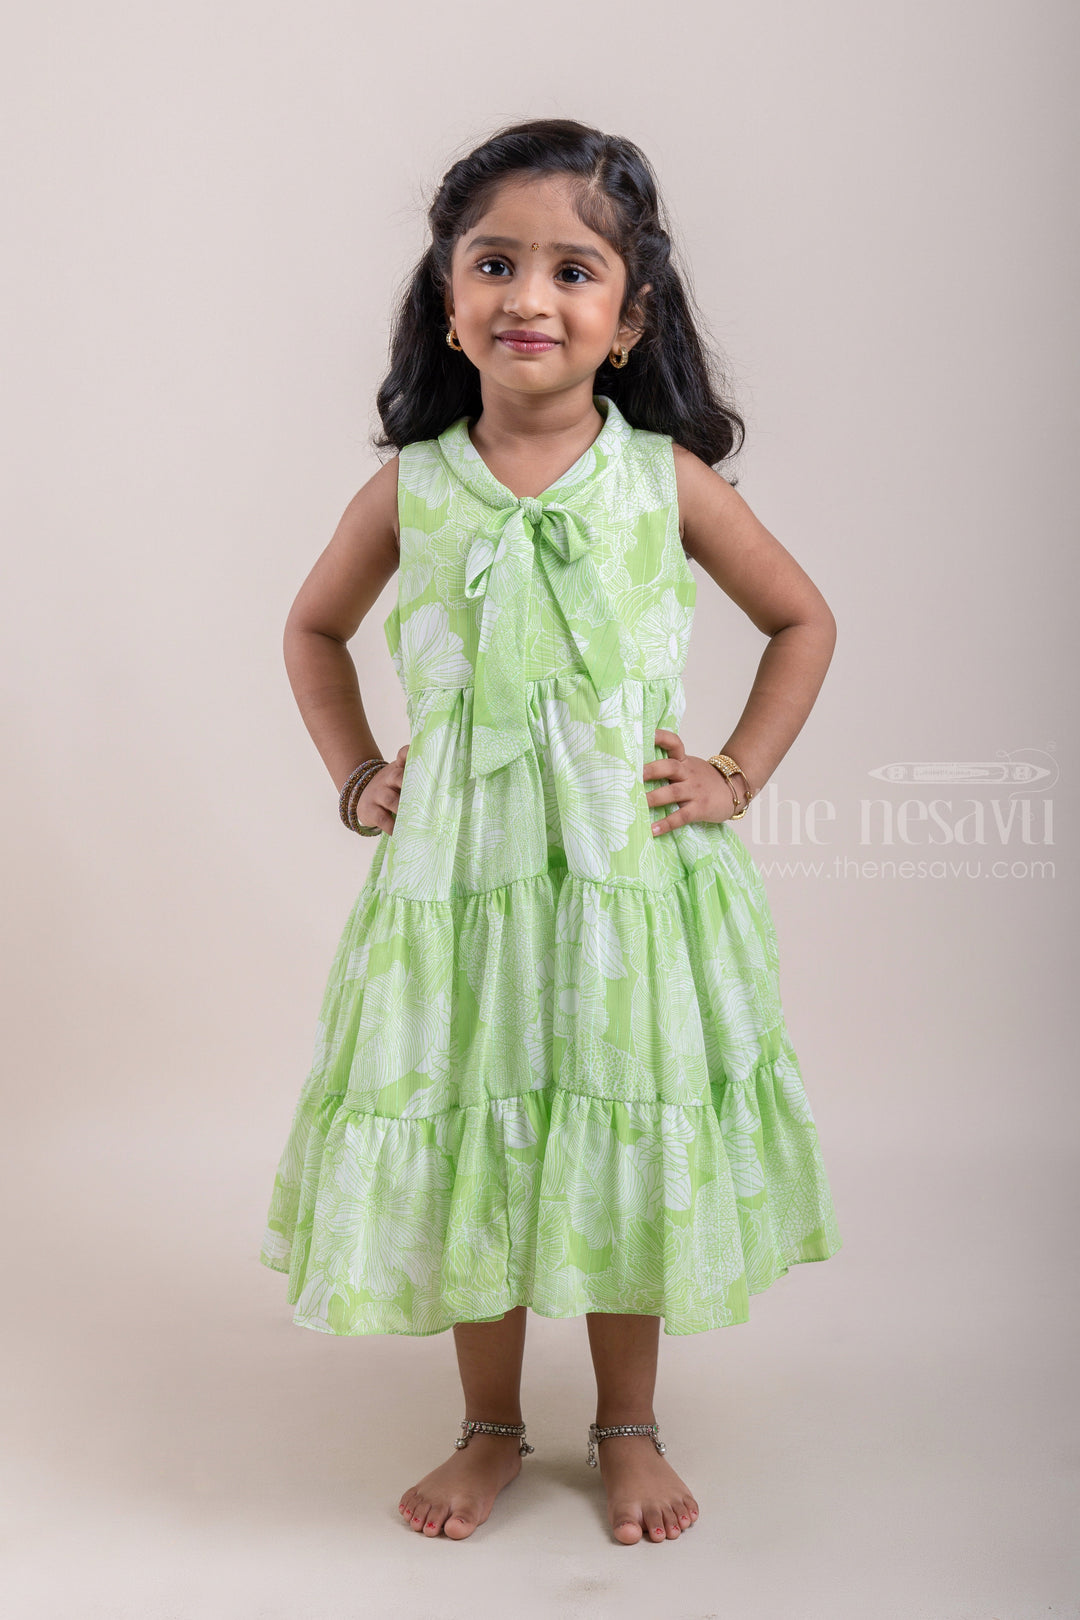 The Nesavu Frocks & Dresses Monochrome Green Tropical Floral Printed N Layered A-Line Frock with Tie-Up Rope For Babys psr silks Nesavu 16 (1Y) / Green / Georgette GFC1090A